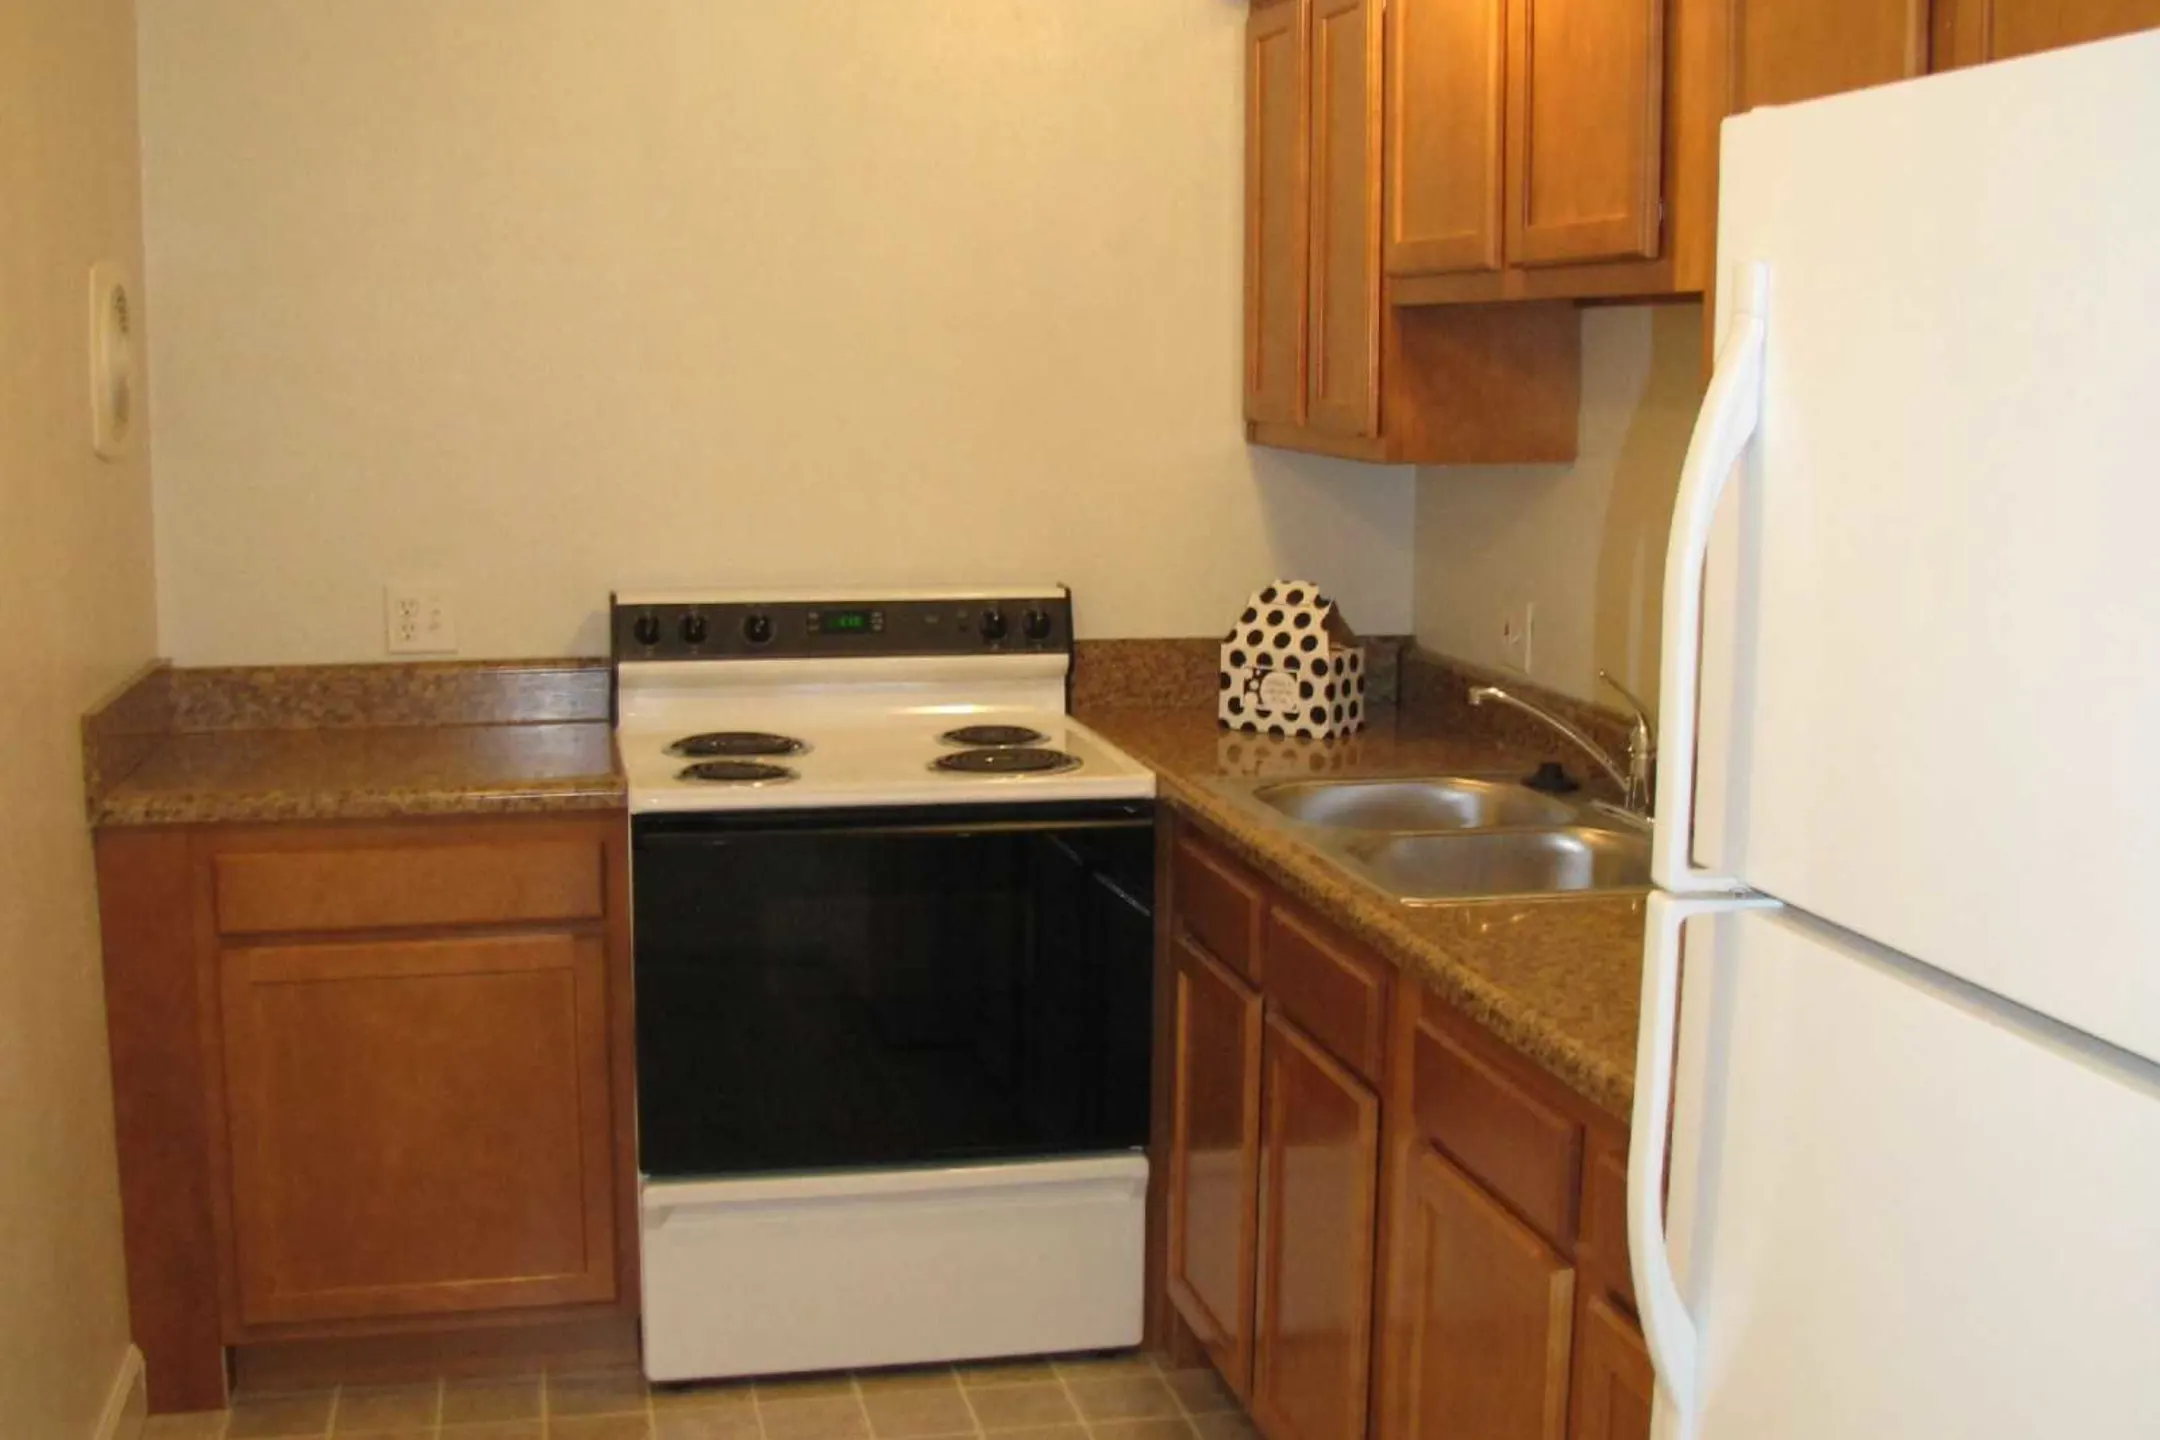 Kitchen - Lake Of The Woods Apartments - Toledo, OH